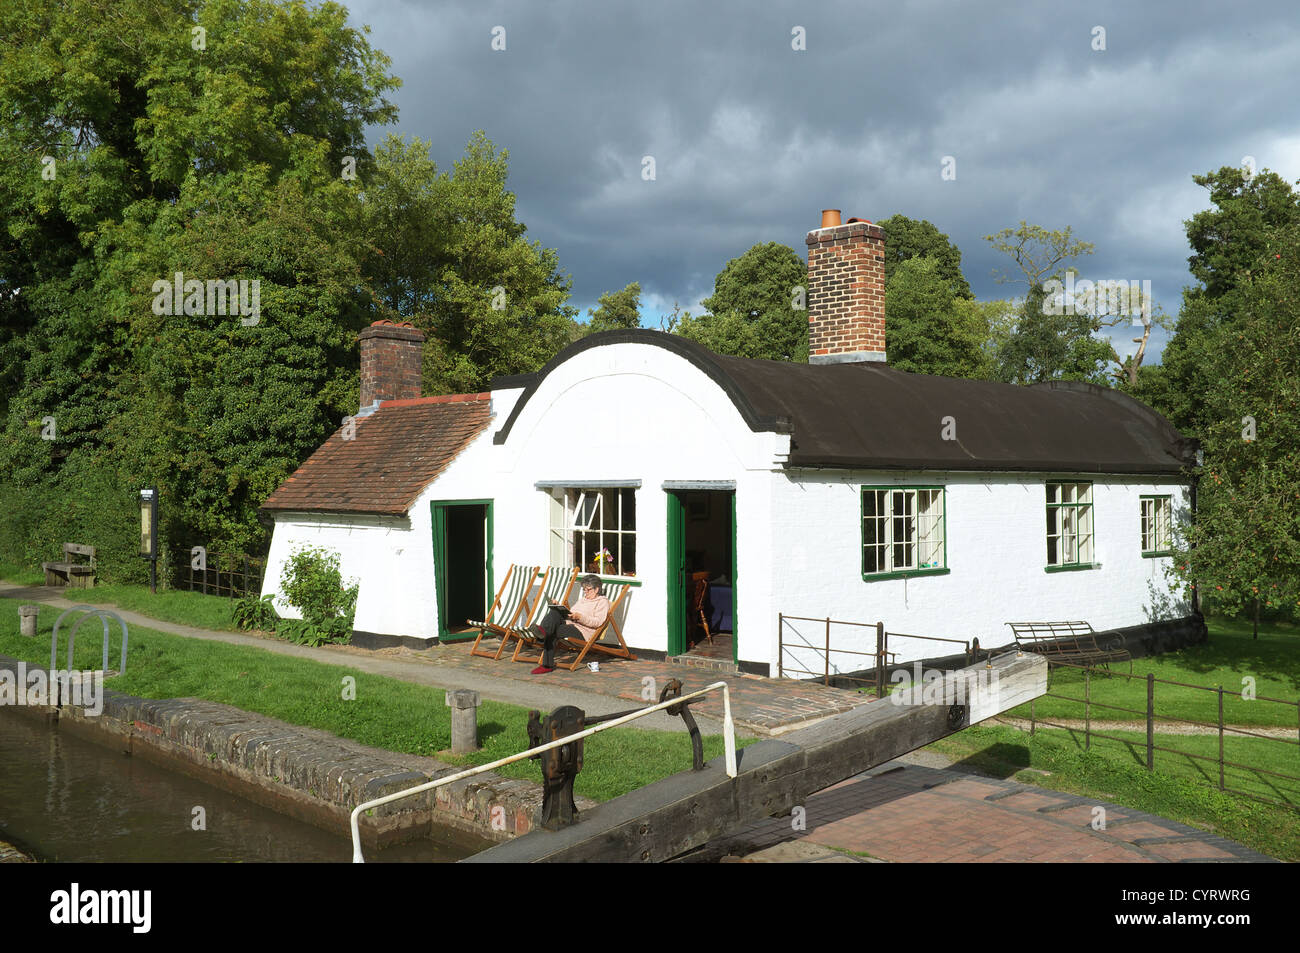 Cilindro serratura coperta keepers cottage a Lowsonford in Stratford upon Avon Canal, Warwickshire, Inghilterra, Foto Stock